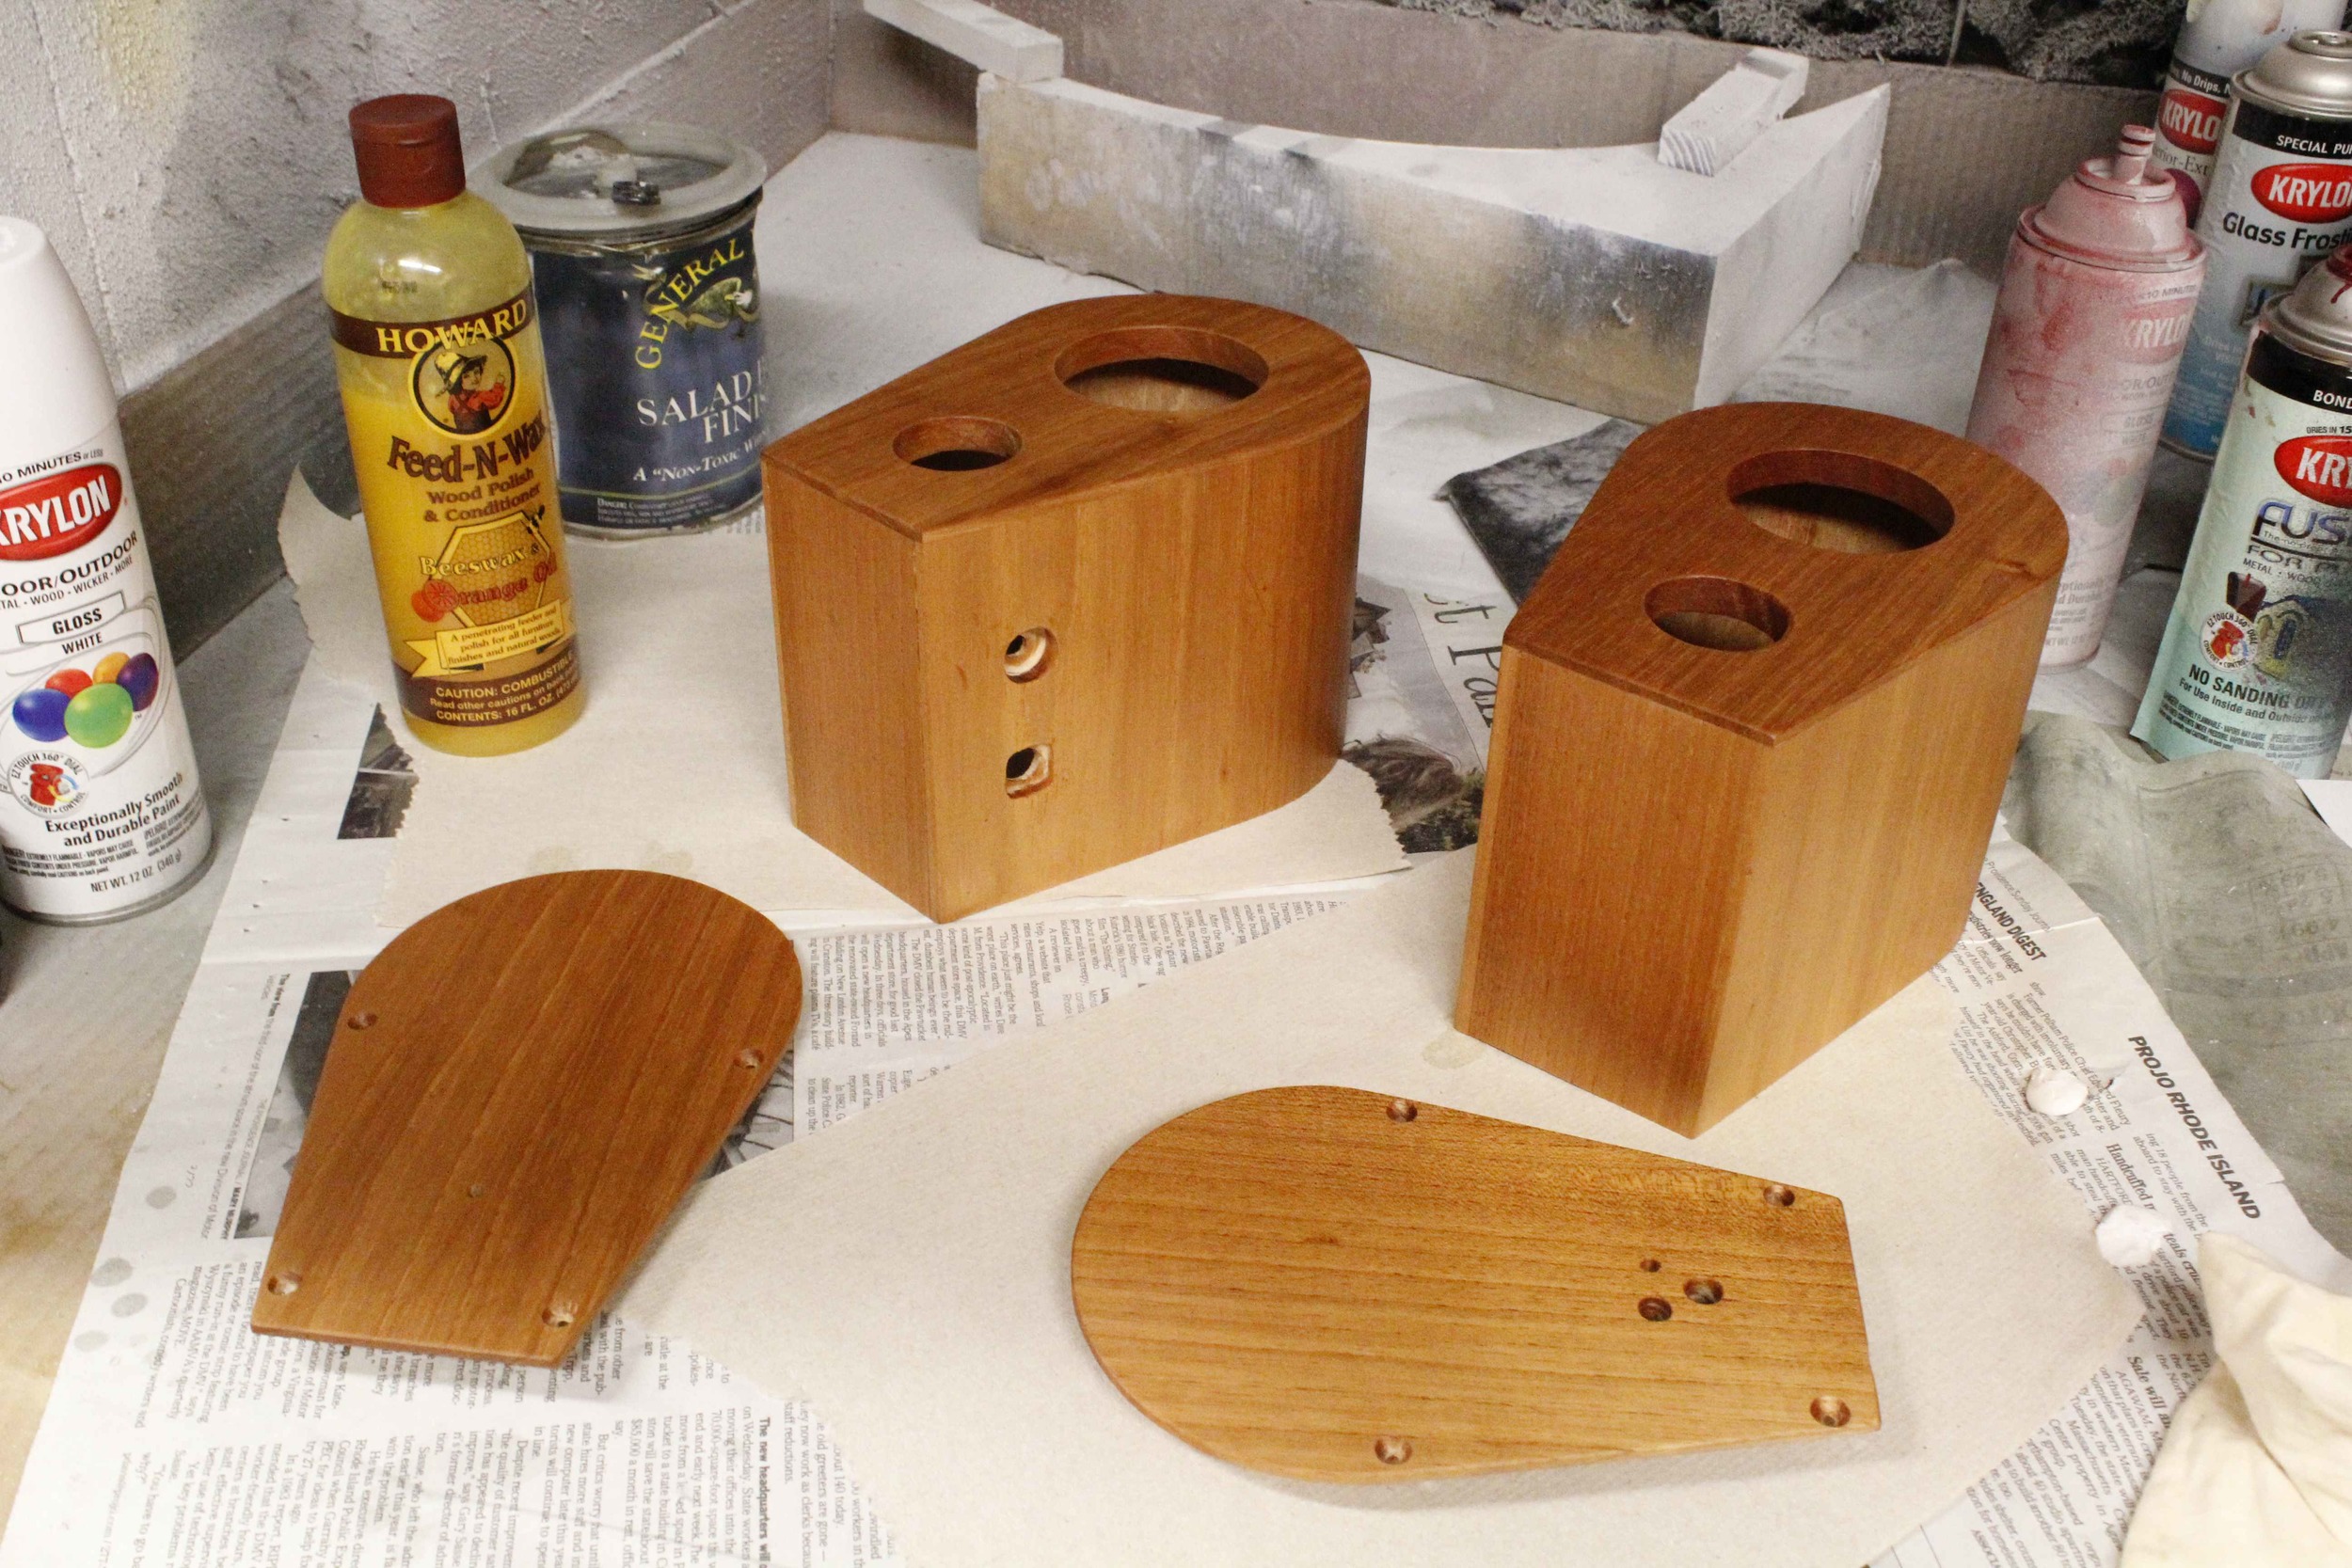  After receiving the parts, I drilled the necessary holes and coated the cabinets with beeswax. 







